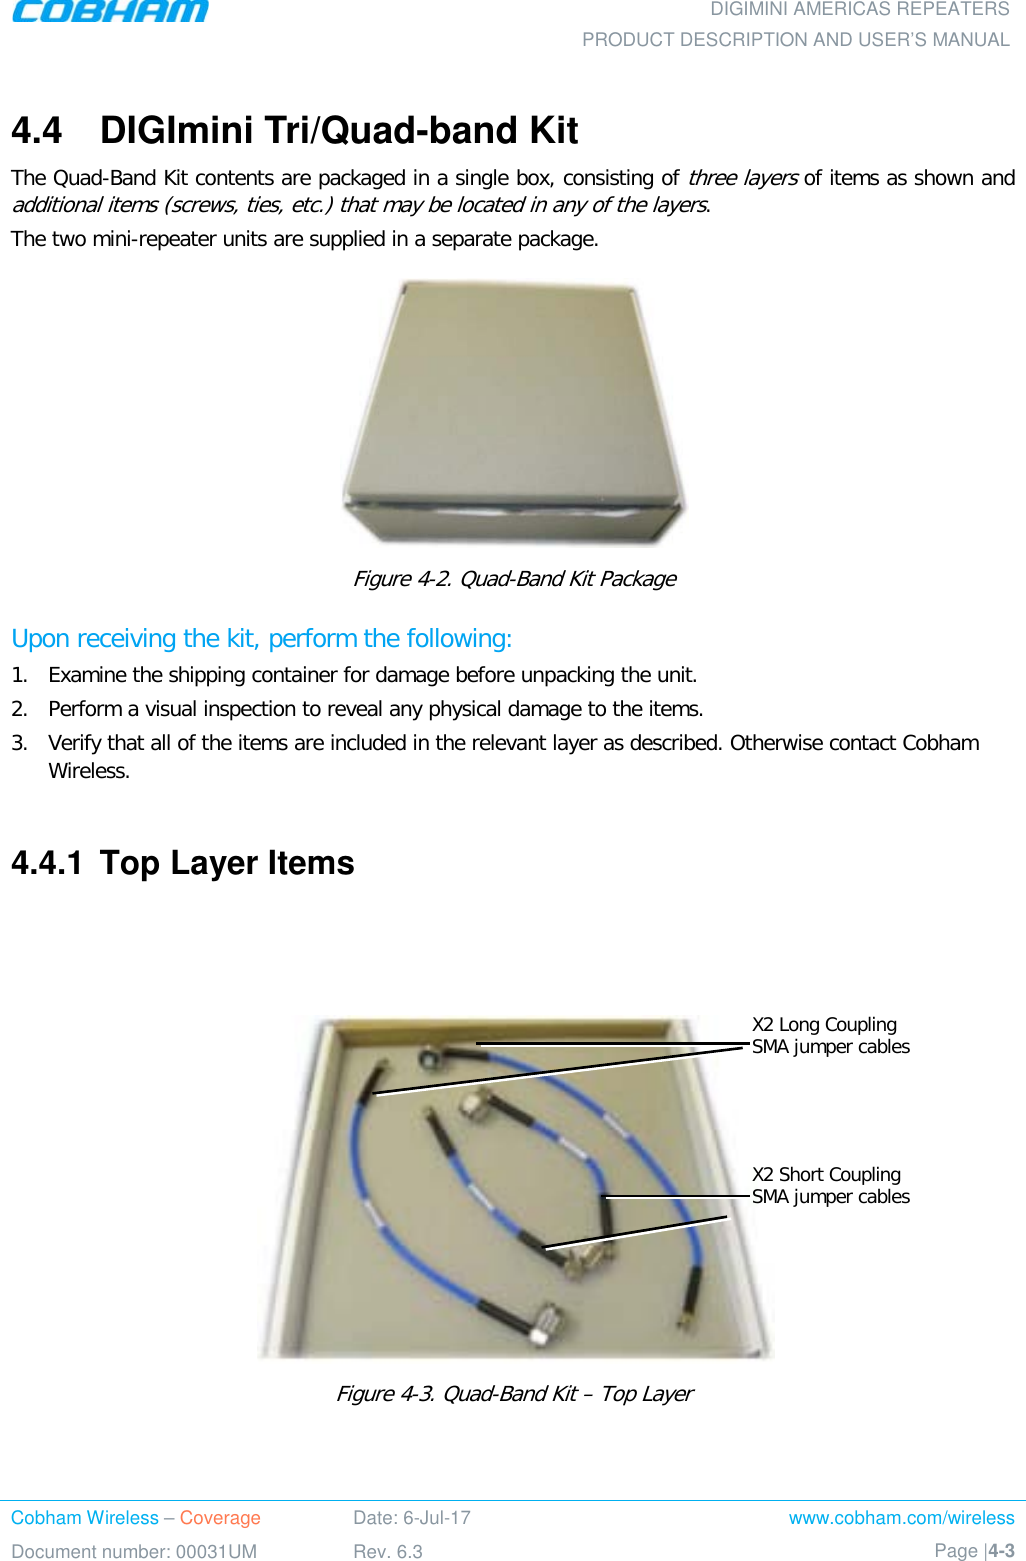  DIGIMINI AMERICAS REPEATERS PRODUCT DESCRIPTION AND USER’S MANUAL Cobham Wireless – Coverage Date: 6-Jul-17 www.cobham.com/wireless Document number: 00031UM Rev. 6.3 Page |4-3  4.4  DIGImini Tri/Quad-band Kit  The Quad-Band Kit contents are packaged in a single box, consisting of three layers of items as shown and additional items (screws, ties, etc.) that may be located in any of the layers. The two mini-repeater units are supplied in a separate package.  Figure  4-2. Quad-Band Kit Package Upon receiving the kit, perform the following:  1.  Examine the shipping container for damage before unpacking the unit. 2.  Perform a visual inspection to reveal any physical damage to the items.   3.  Verify that all of the items are included in the relevant layer as described. Otherwise contact Cobham Wireless.   4.4.1  Top Layer Items     Figure  4-3. Quad-Band Kit – Top Layer    X2 Long Coupling SMA jumper cables X2 Short Coupling SMA jumper cables 